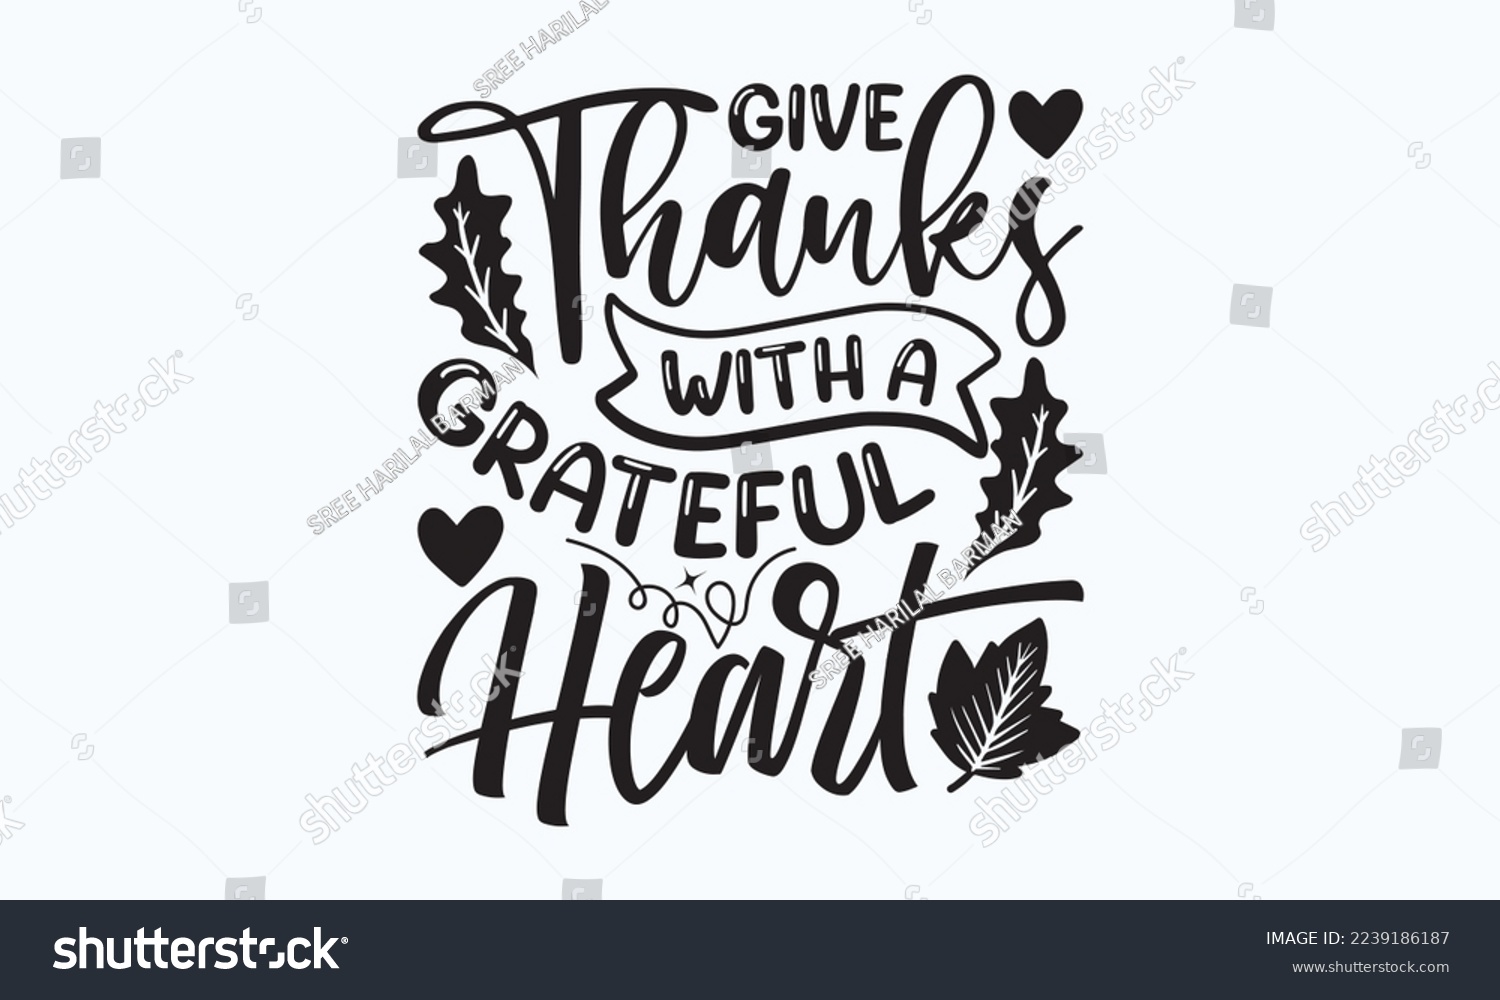 SVG of Give thanks with a grateful heart - President's day T-shirt Design, File Sports SVG Design, Sports typography t-shirt design, For stickers, Templet, mugs, etc. for Cutting, cards, and flyers. svg